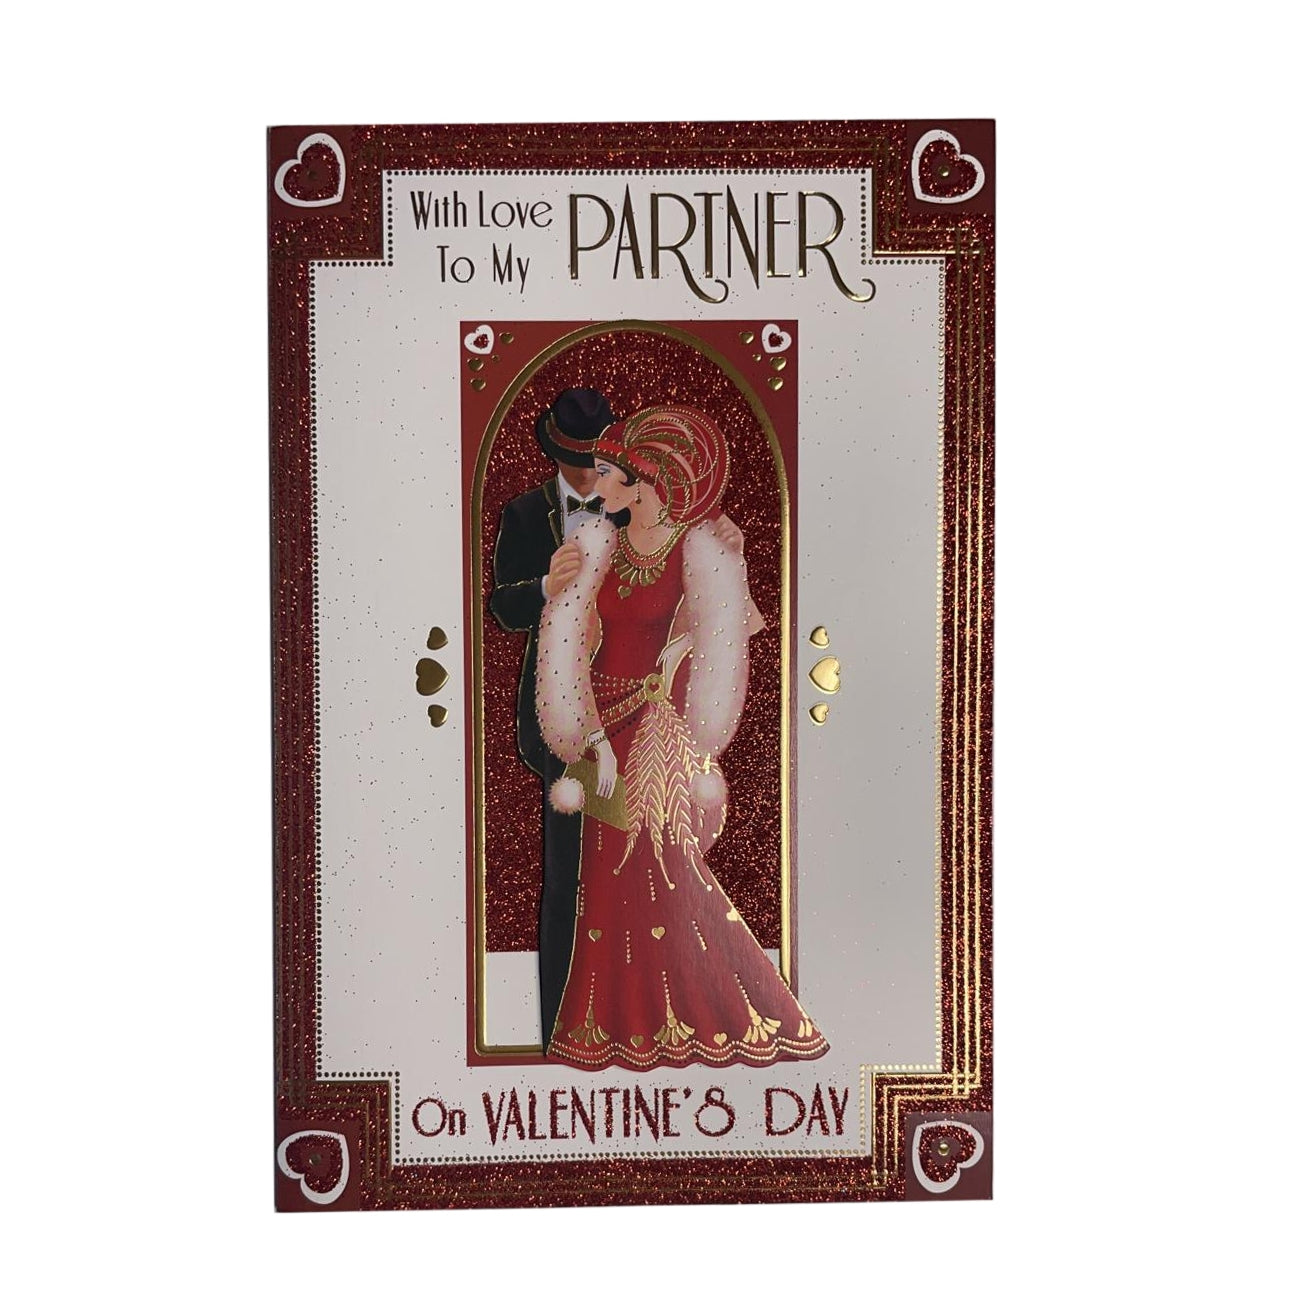 With Love To My Partner Couple Design Red Glittered Open Valentine's Day Card